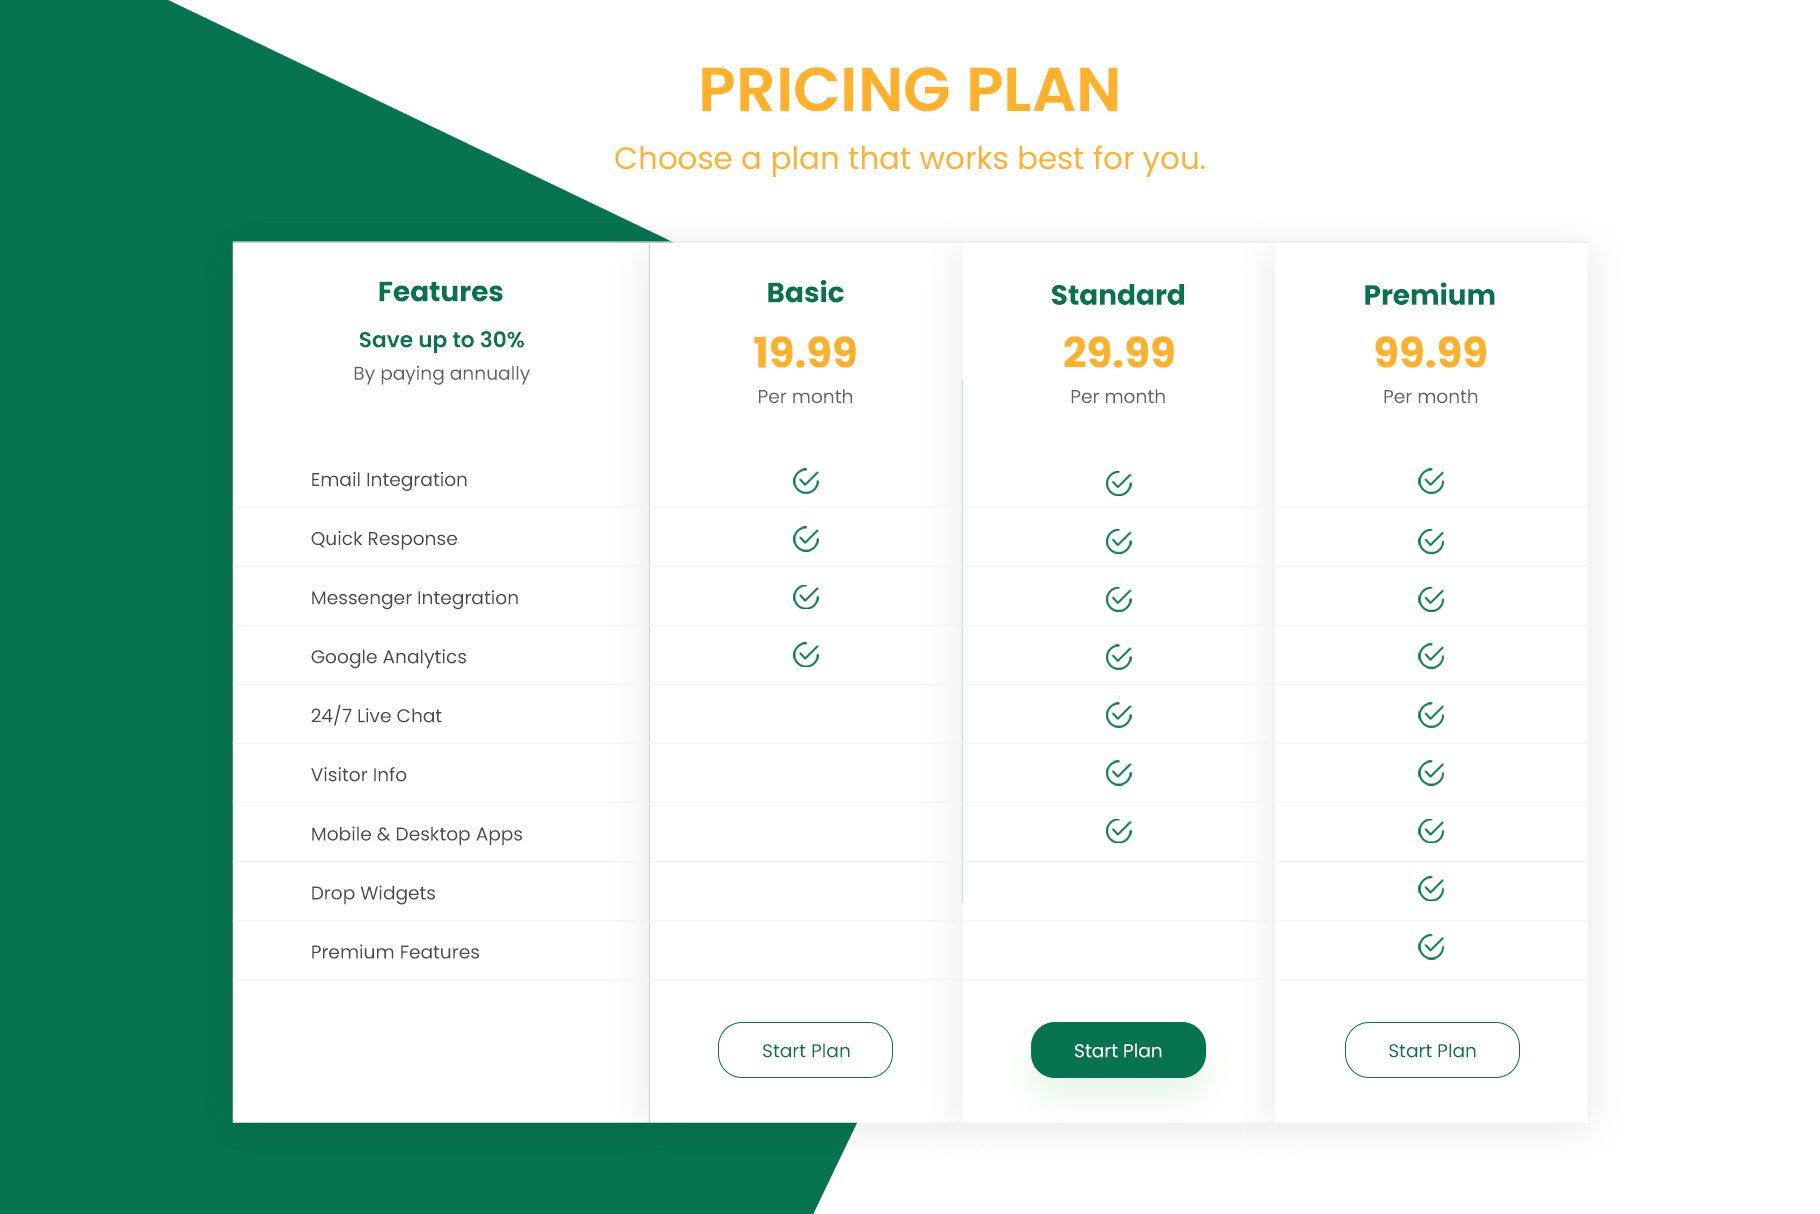 Pricing Plan preview image.